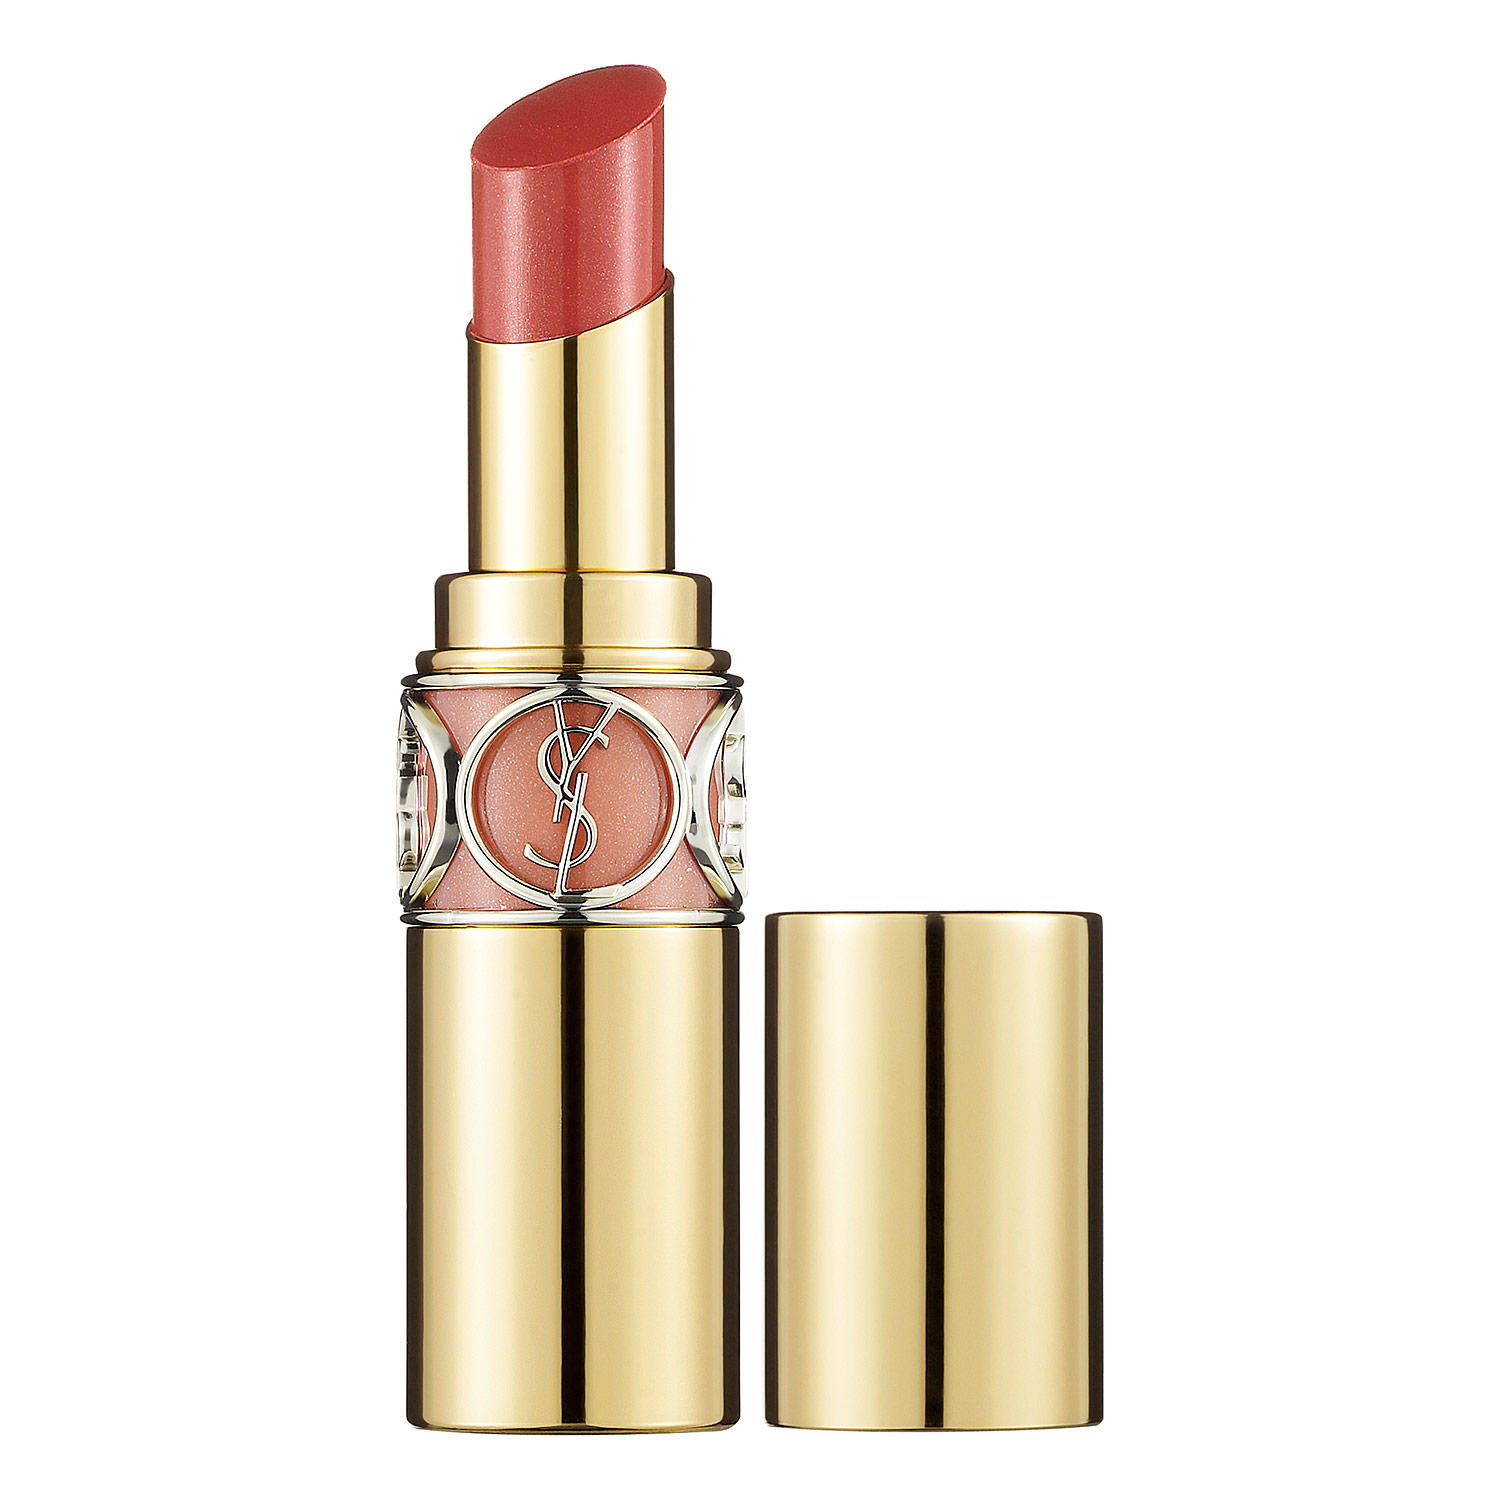 Ysl Rouge Volupte Shine Lipstick Nude In Private 09 Best Deals On Ysl Cosmetics